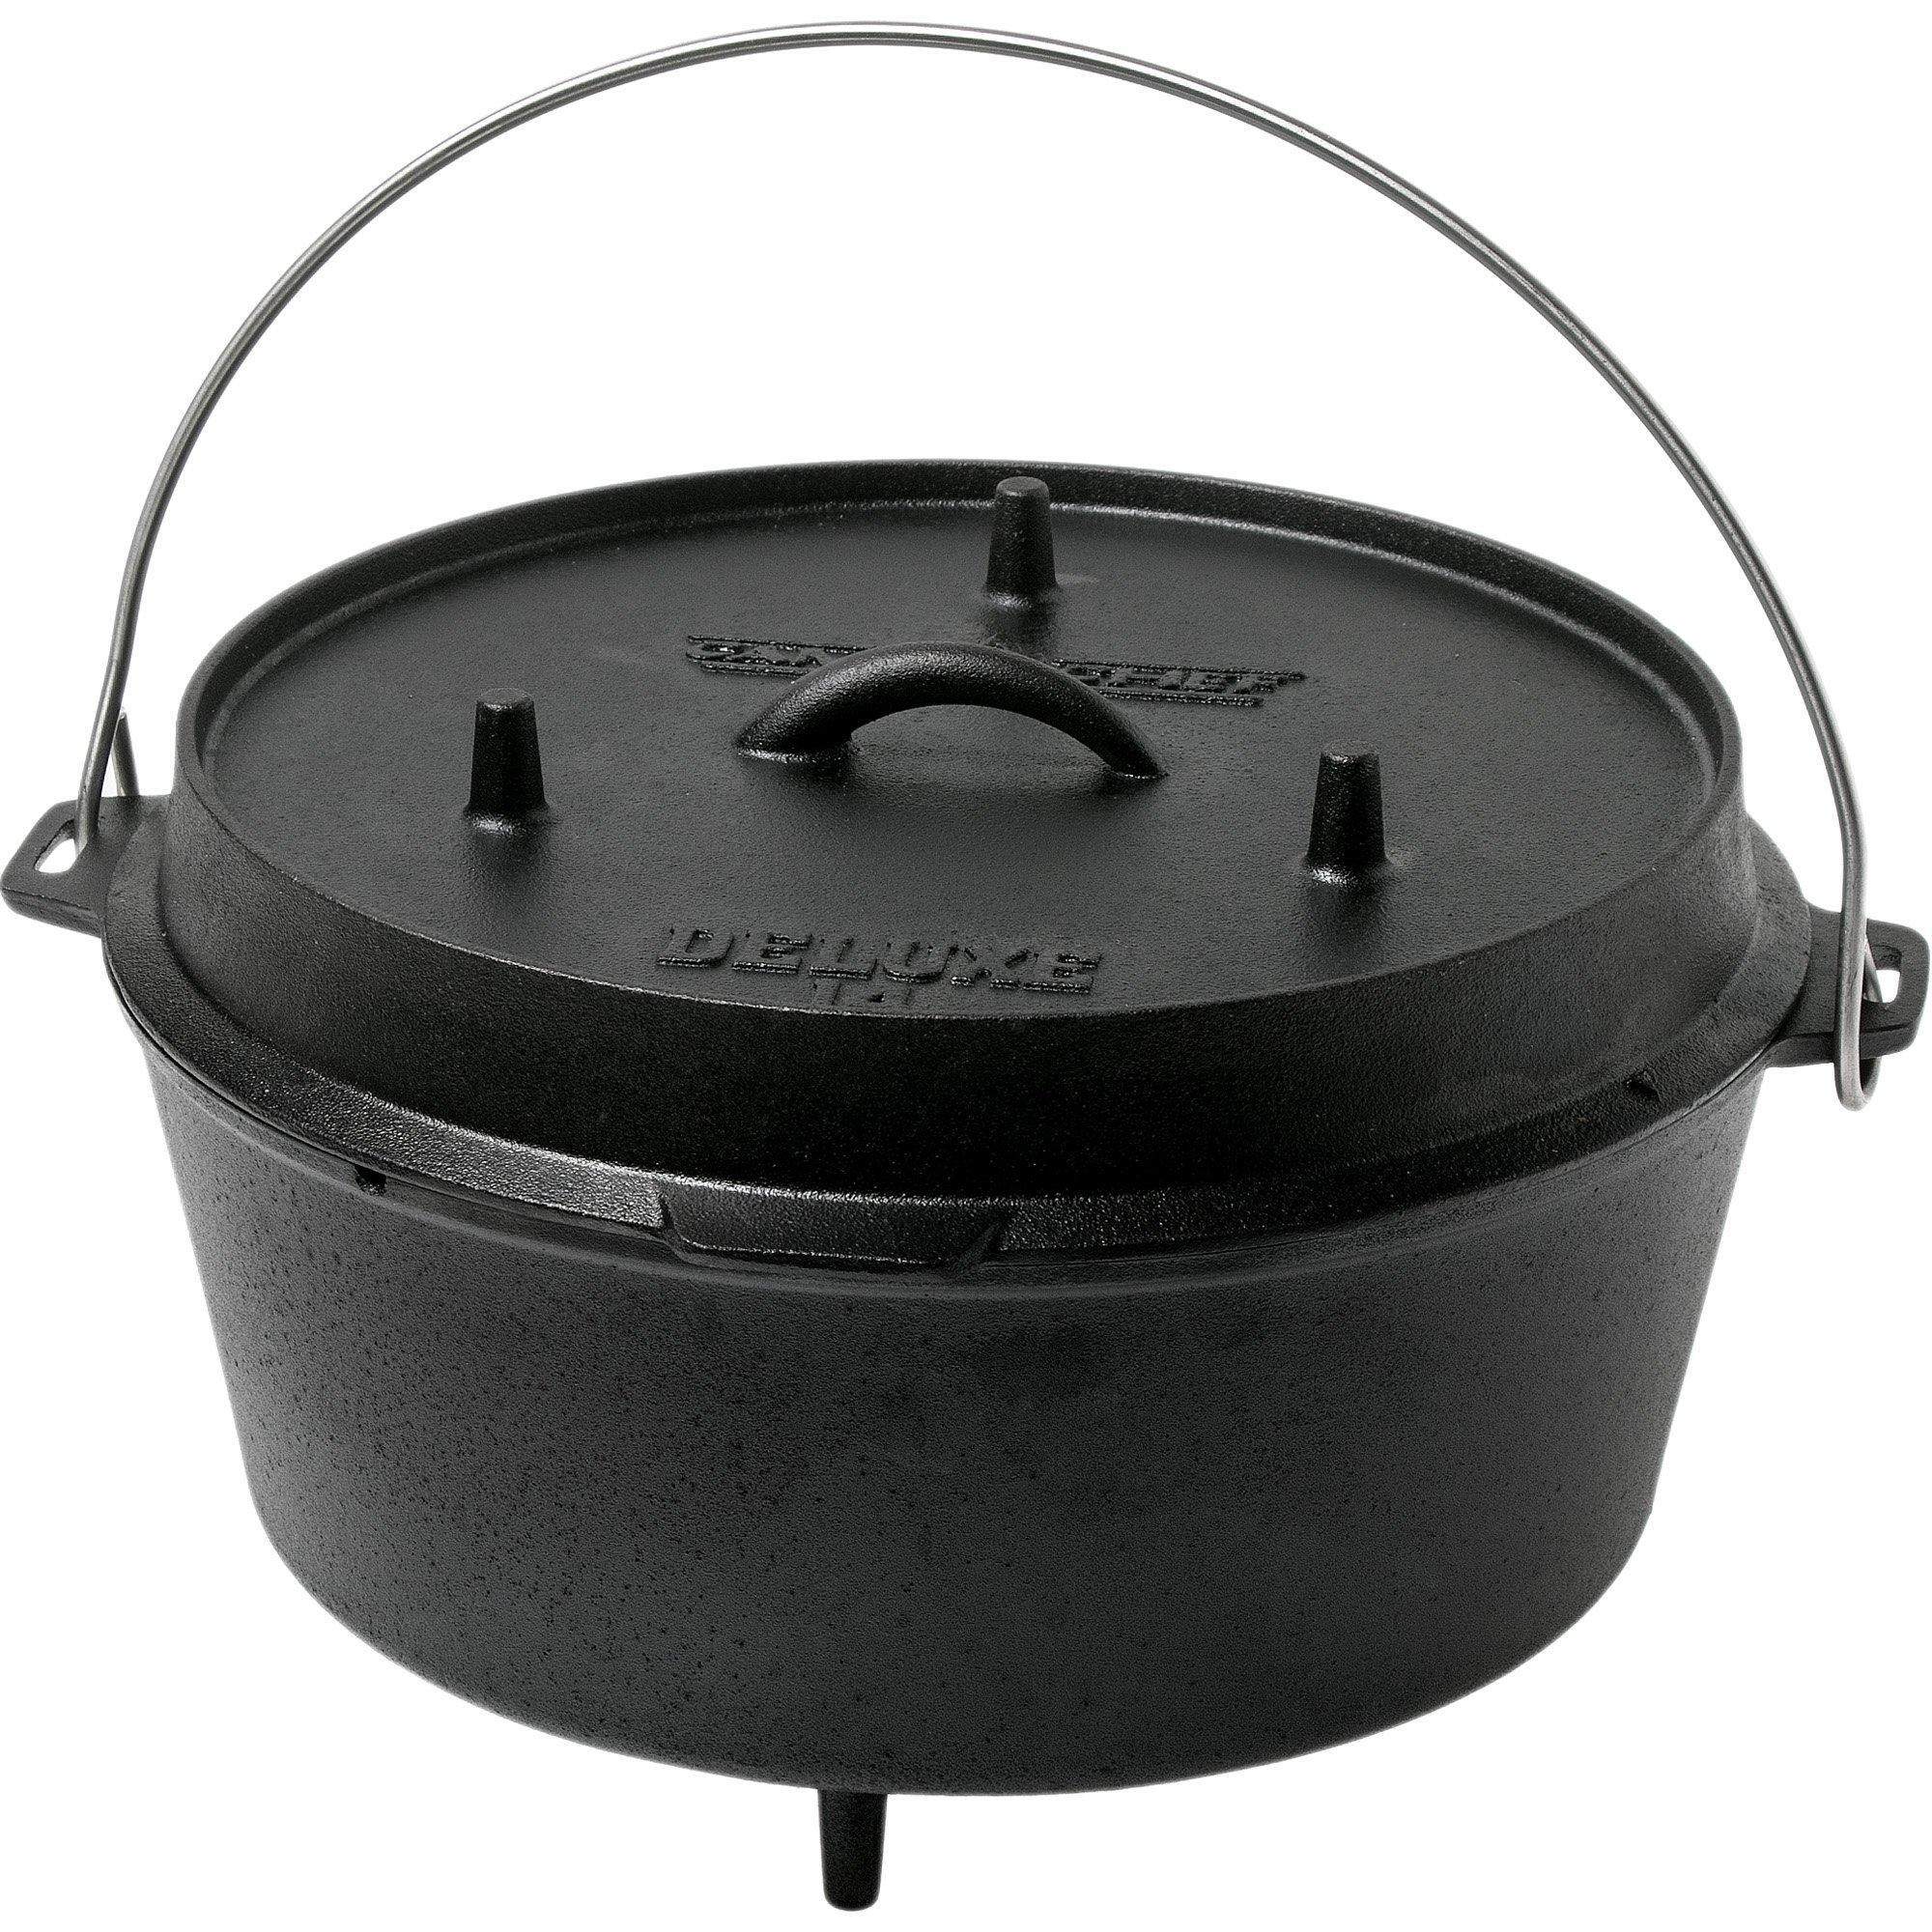 Camp Chef Camp Chef 14" Deluxe Dutch Oven